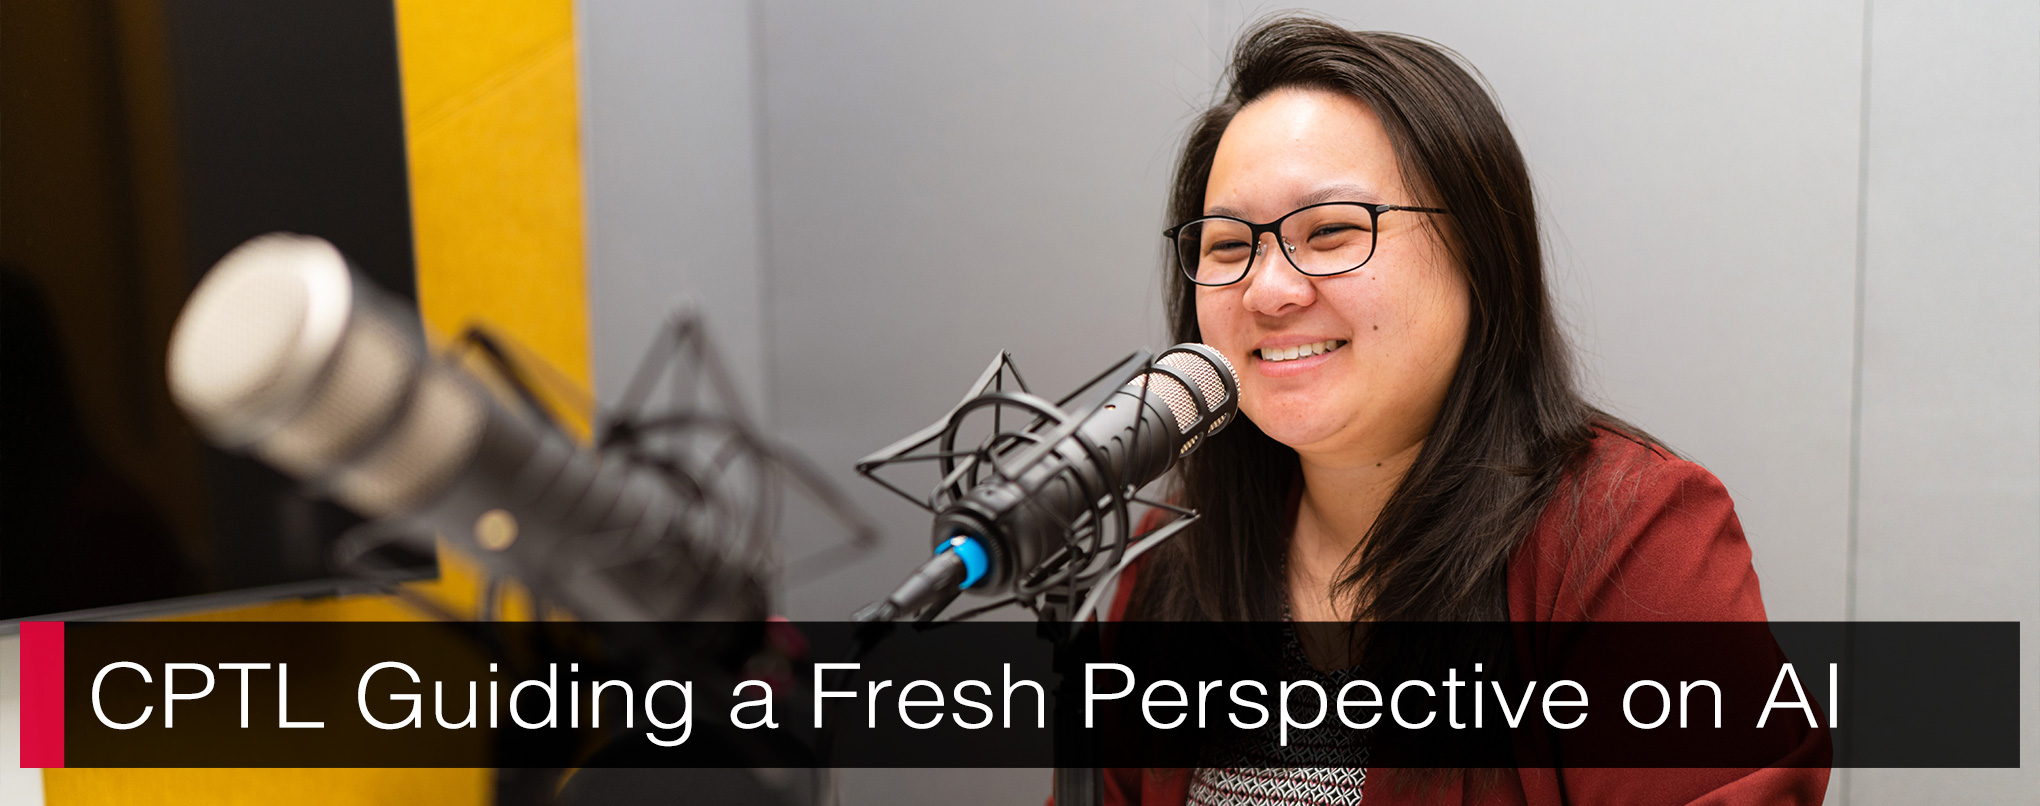 Dr. Victoria Chen smiling while speaking into a microphone in a podcast room with text, 